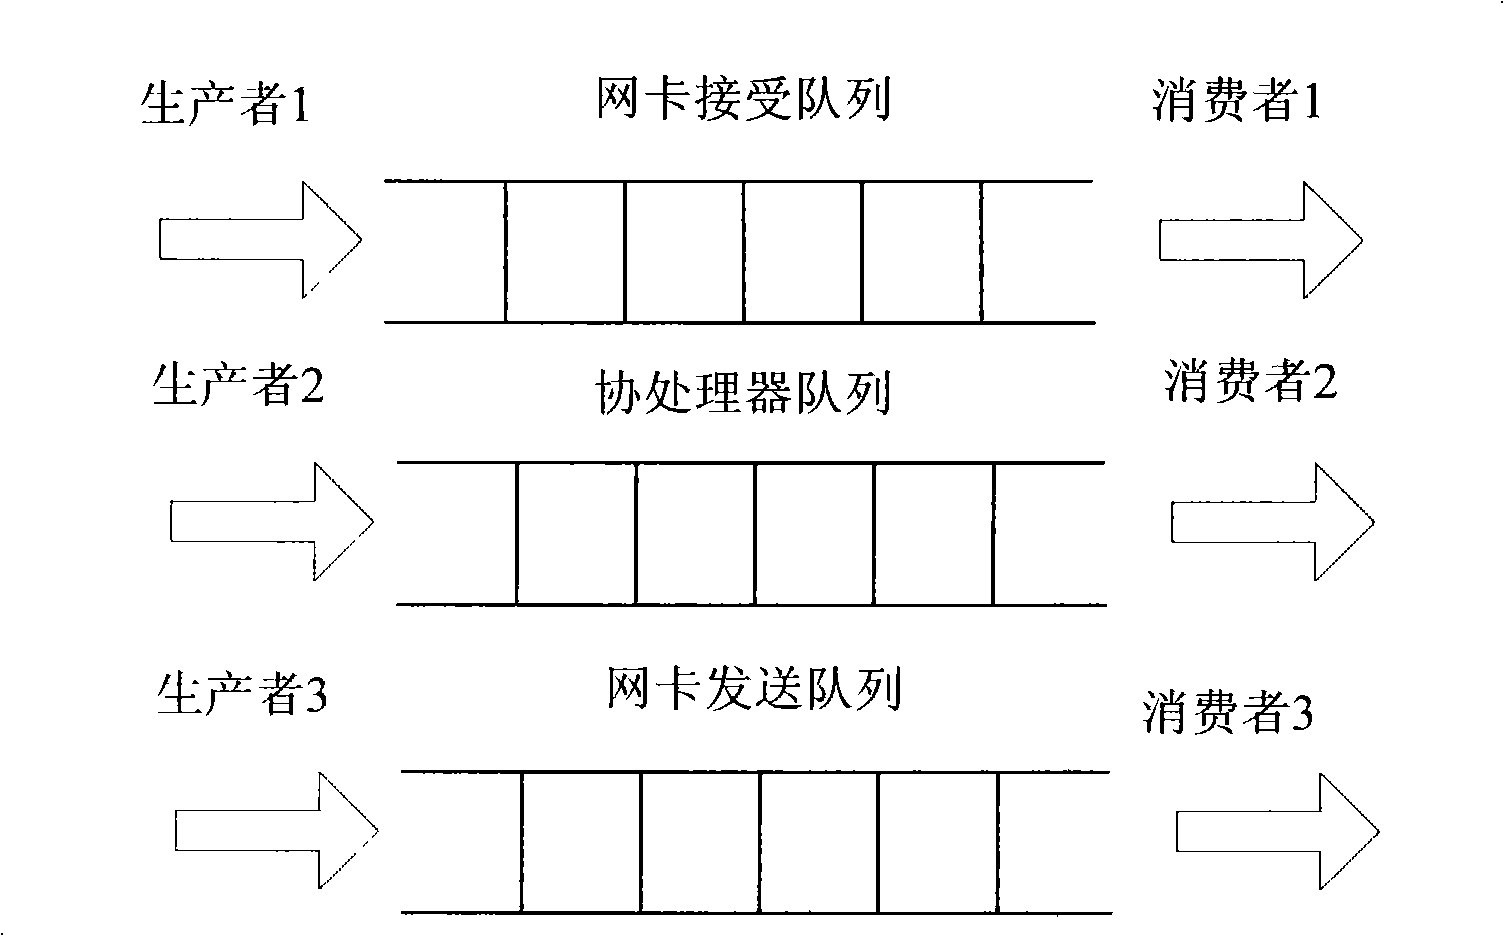 Network datagram processing method, system and device